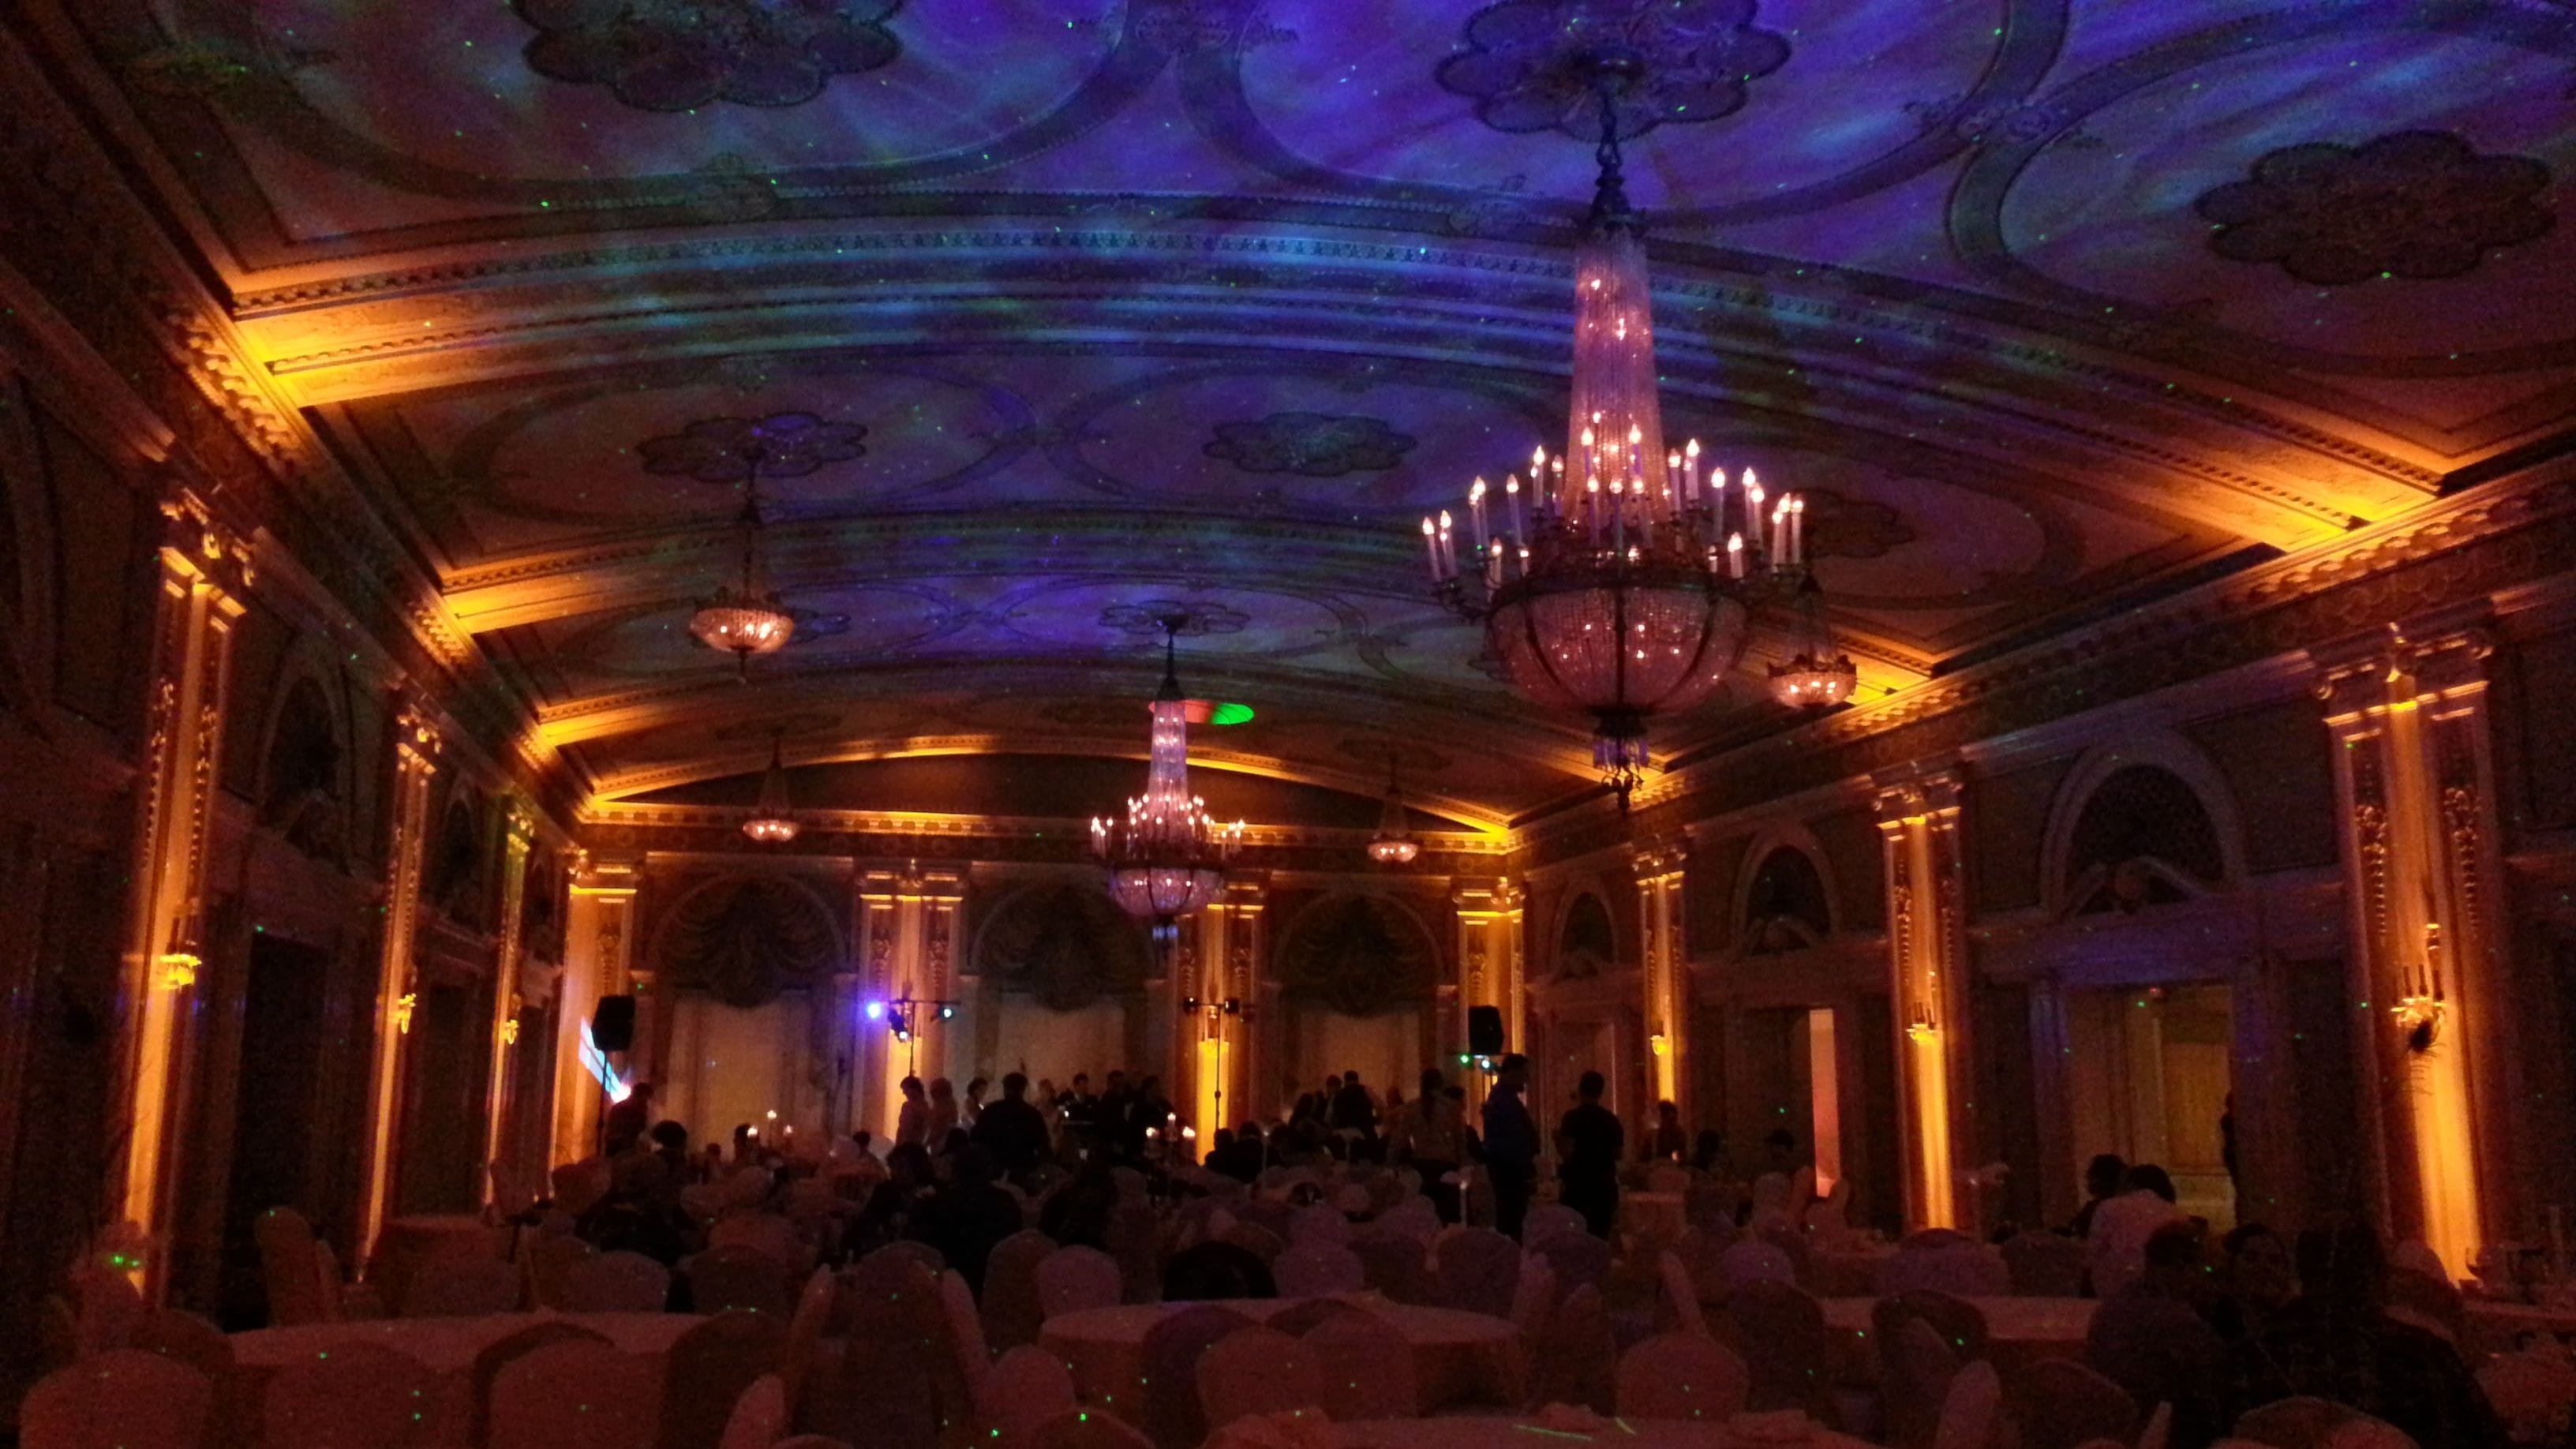 Up lighting in amber with the stars and Northern Lights dancing on the ceiling at Greysolon Ballroom.